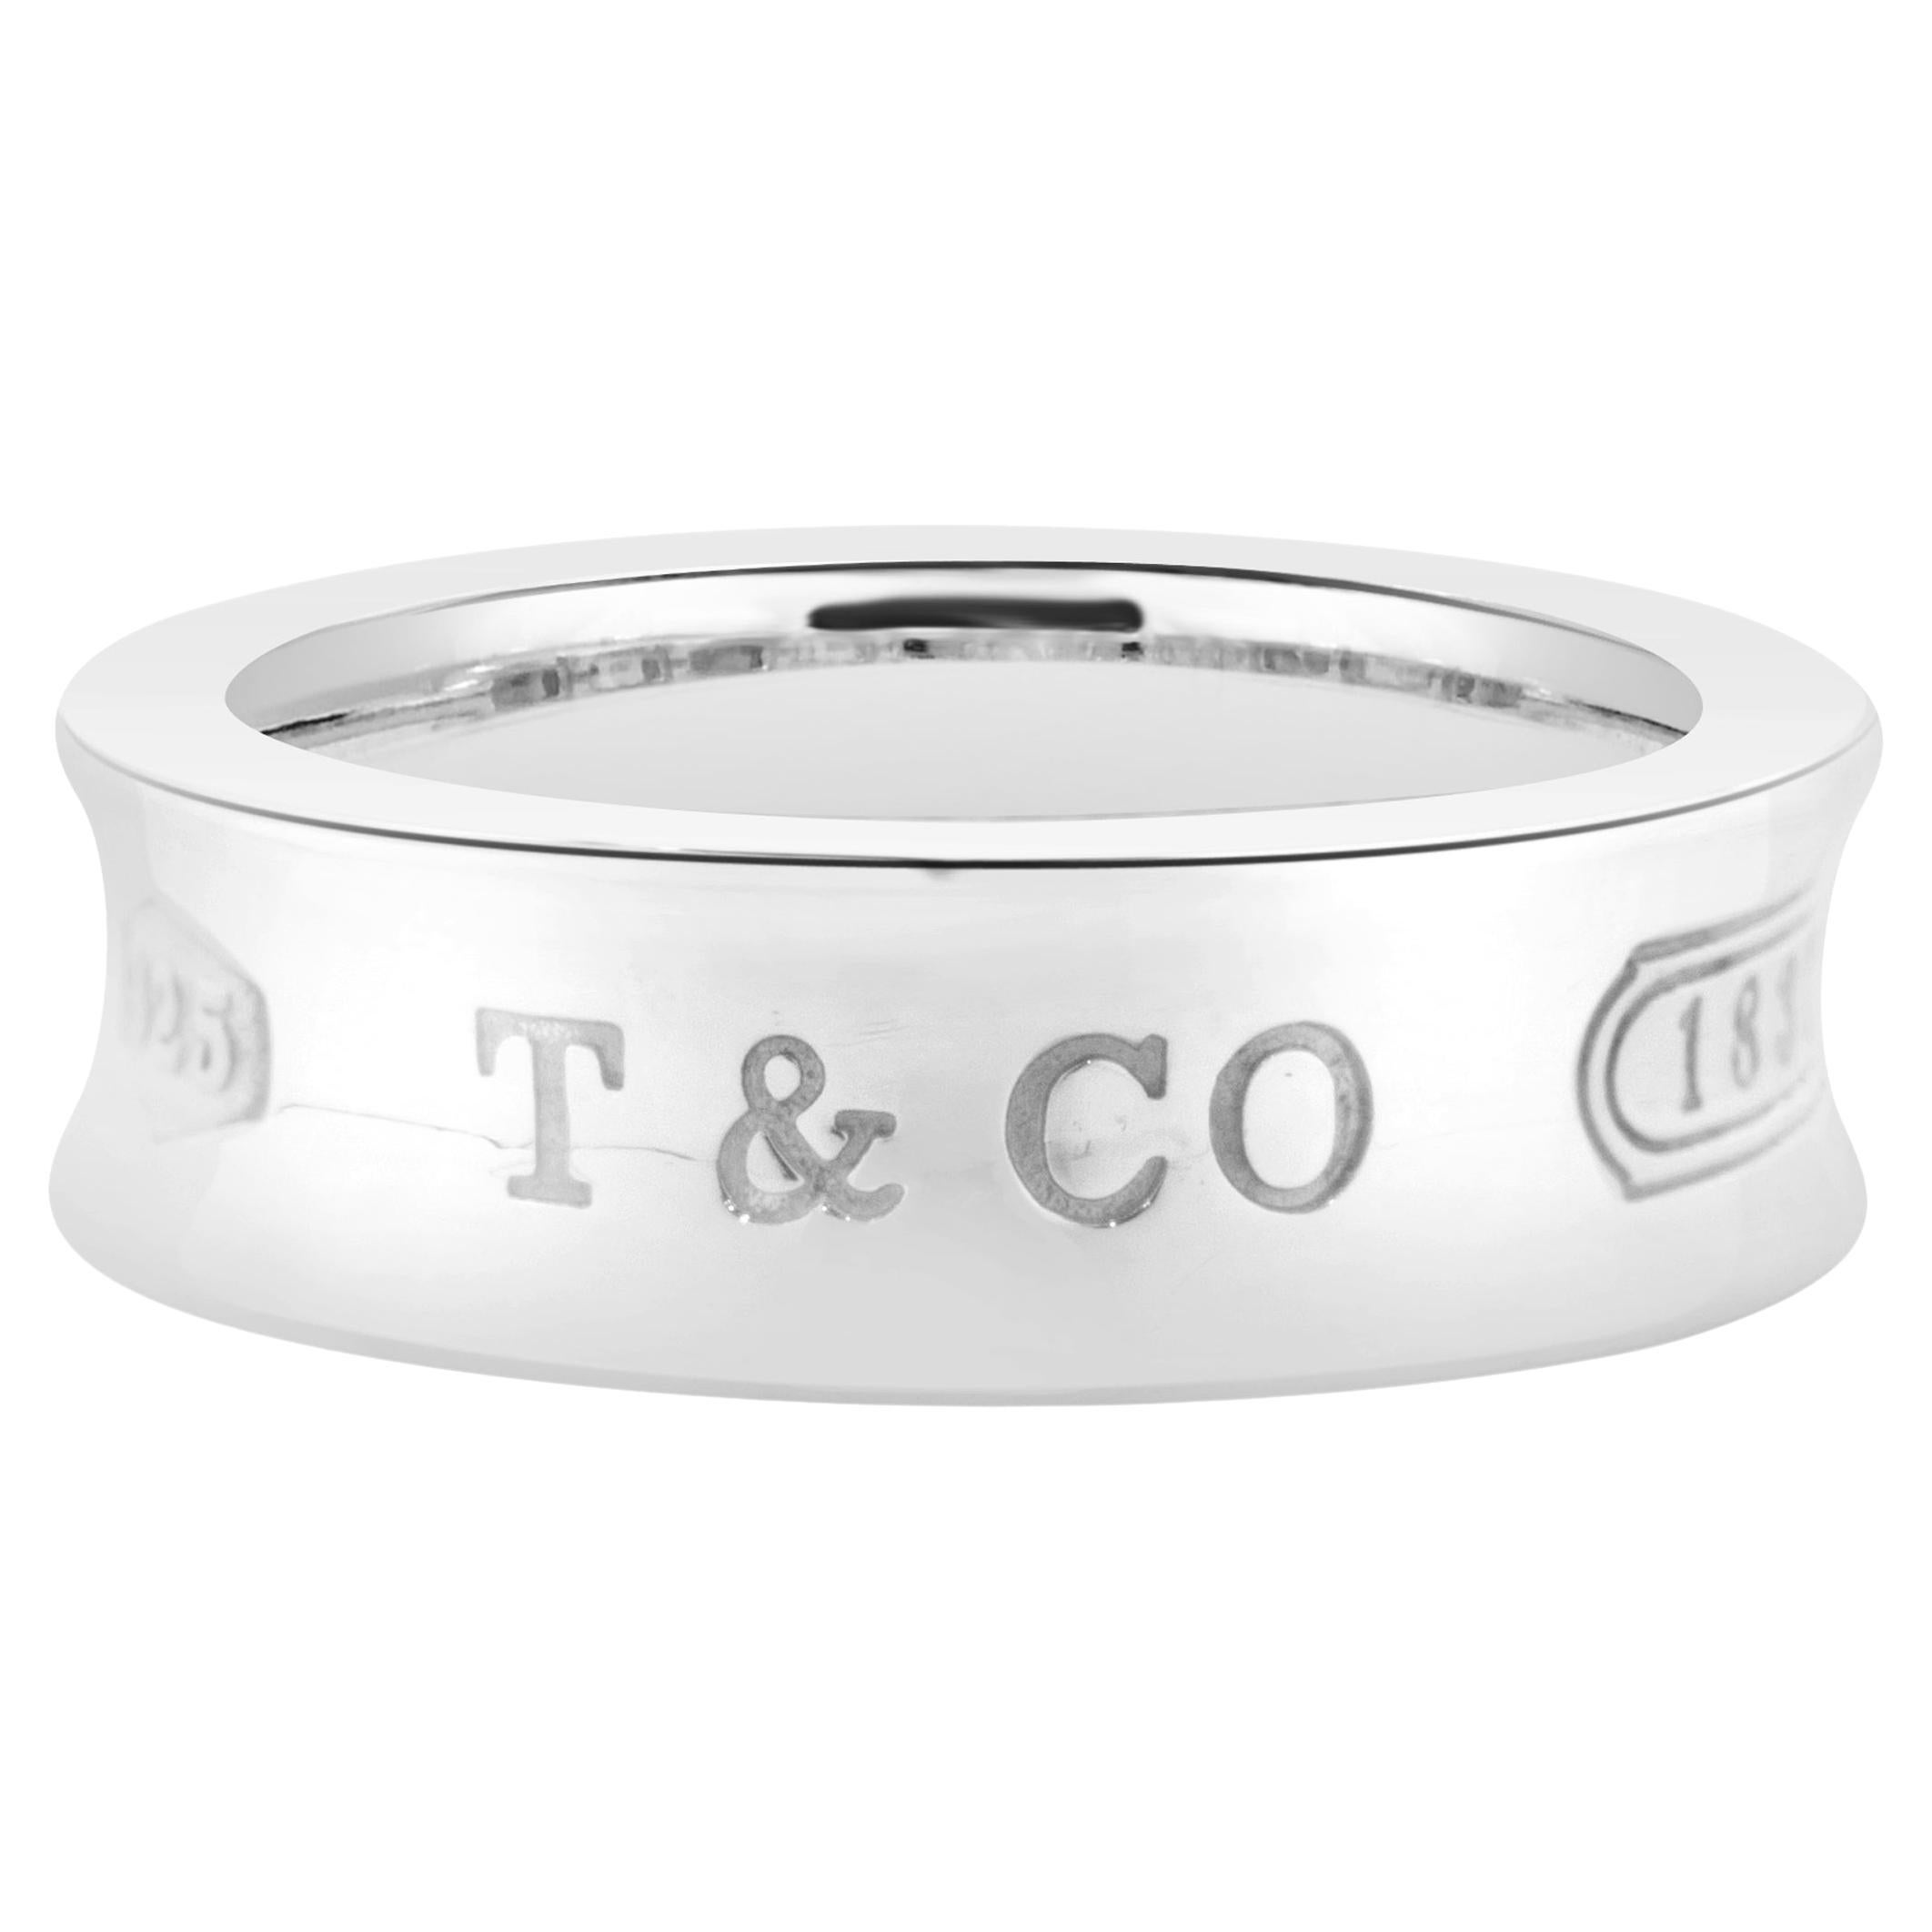 What does the “1837” on Tiffany & Co. jewelry mean?